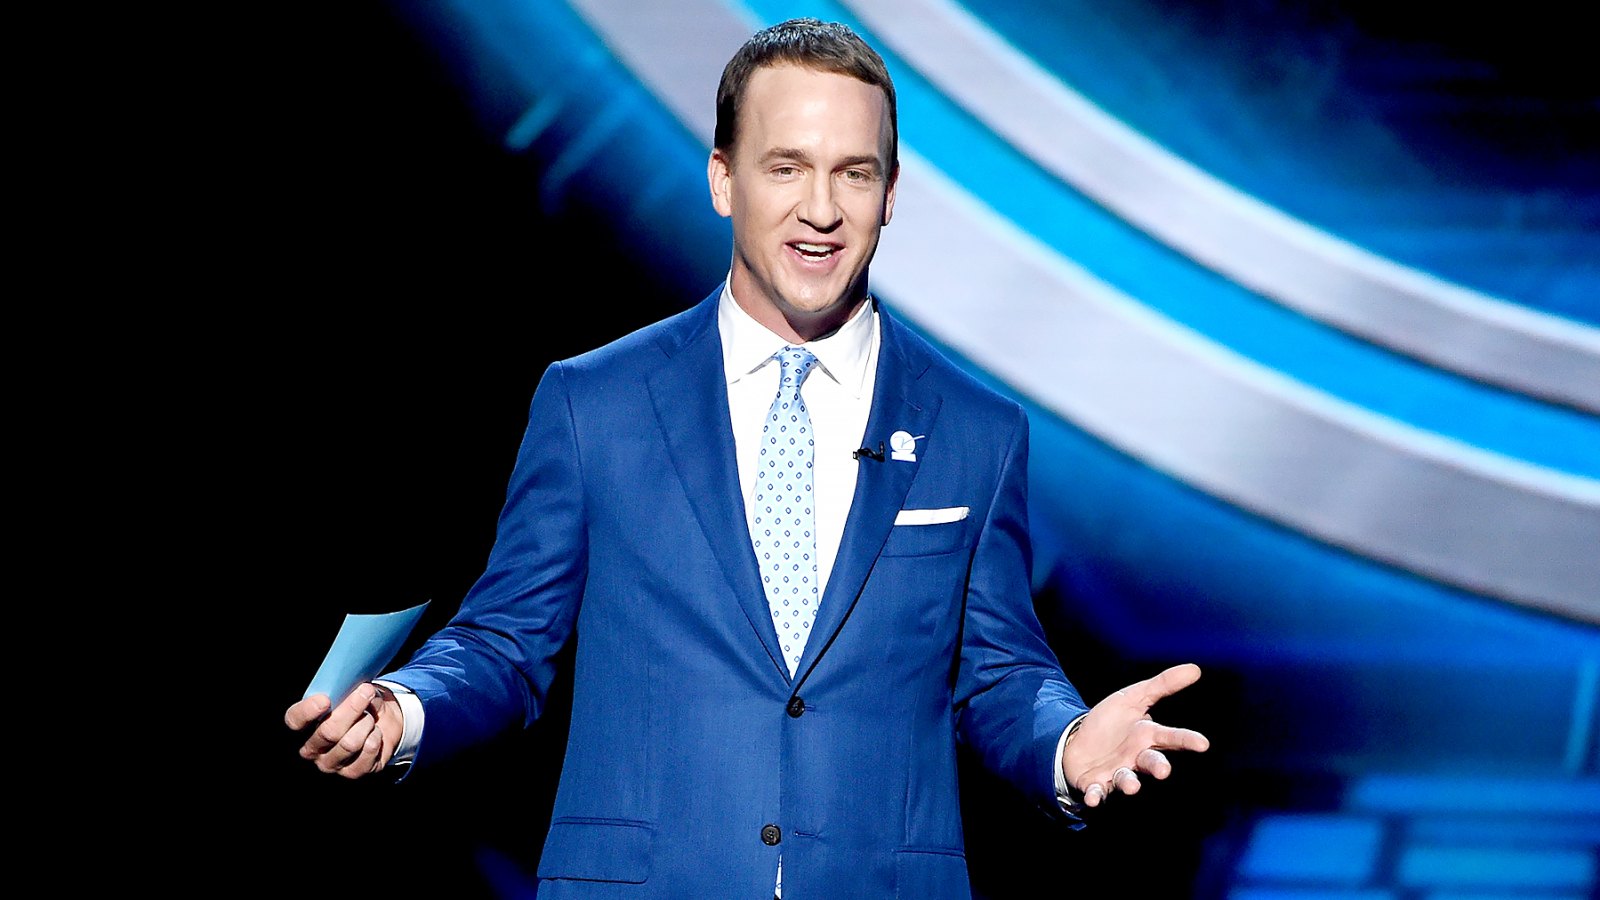 Host Peyton Manning speaks onstage at The 2017 ESPYS at Microsoft Theater on July 12, 2017 in Los Angeles, California. Kevin Winter/Getty Images